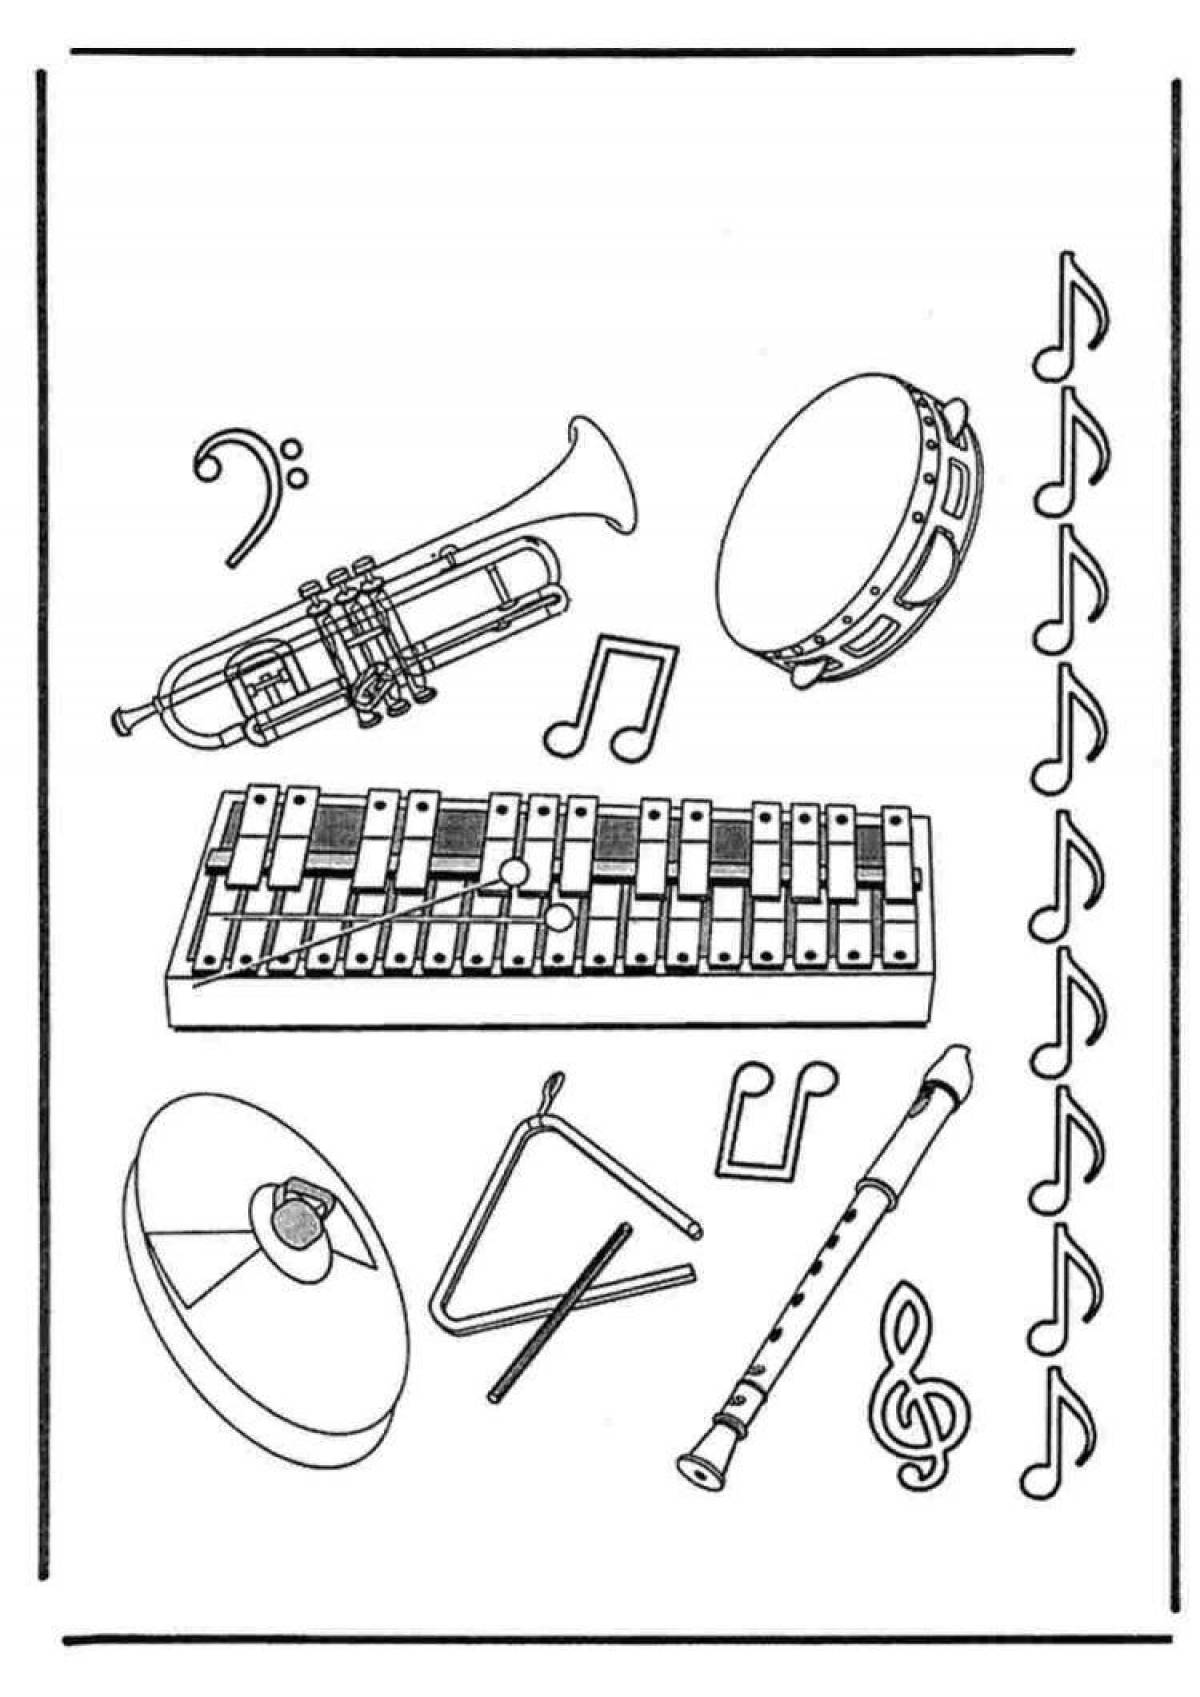 Fun musical instruments coloring pages for preschoolers